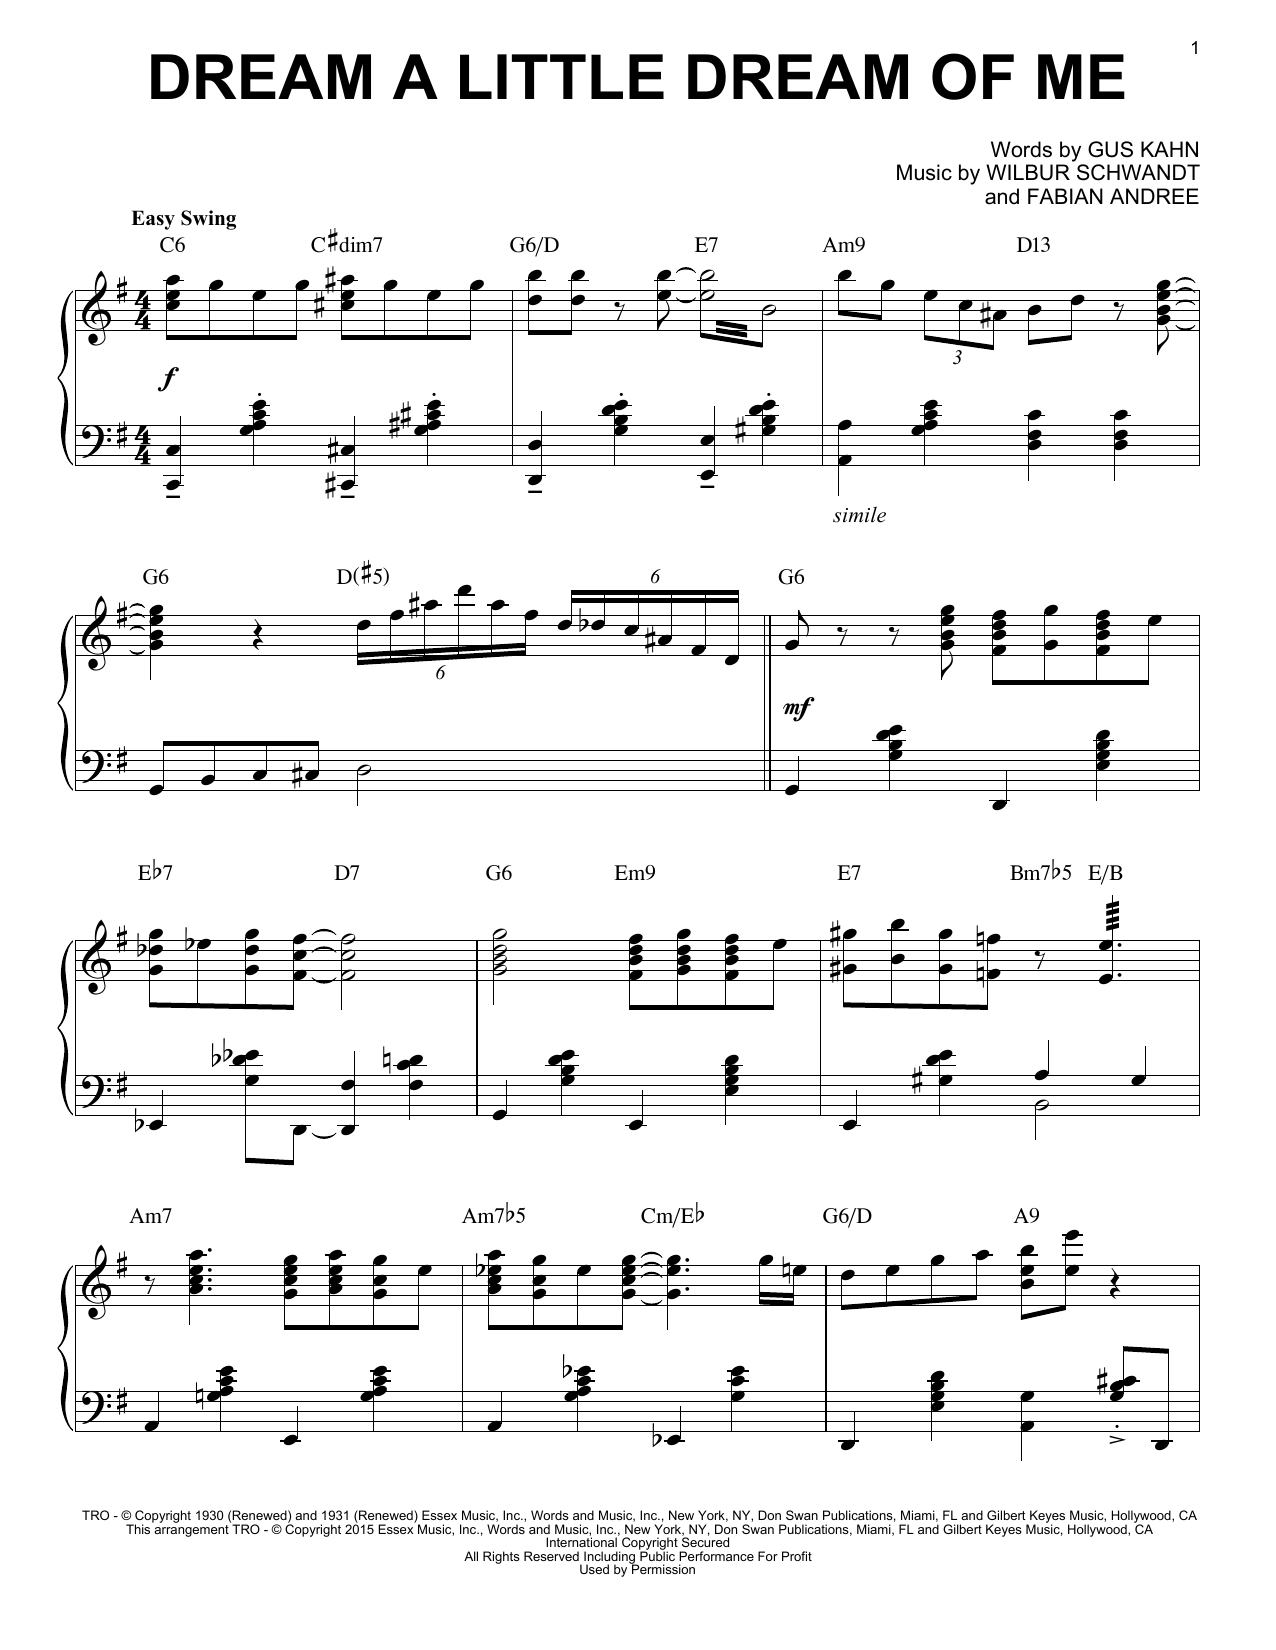 Download The Mamas & The Papas Dream A Little Dream Of Me [Jazz versio Sheet Music